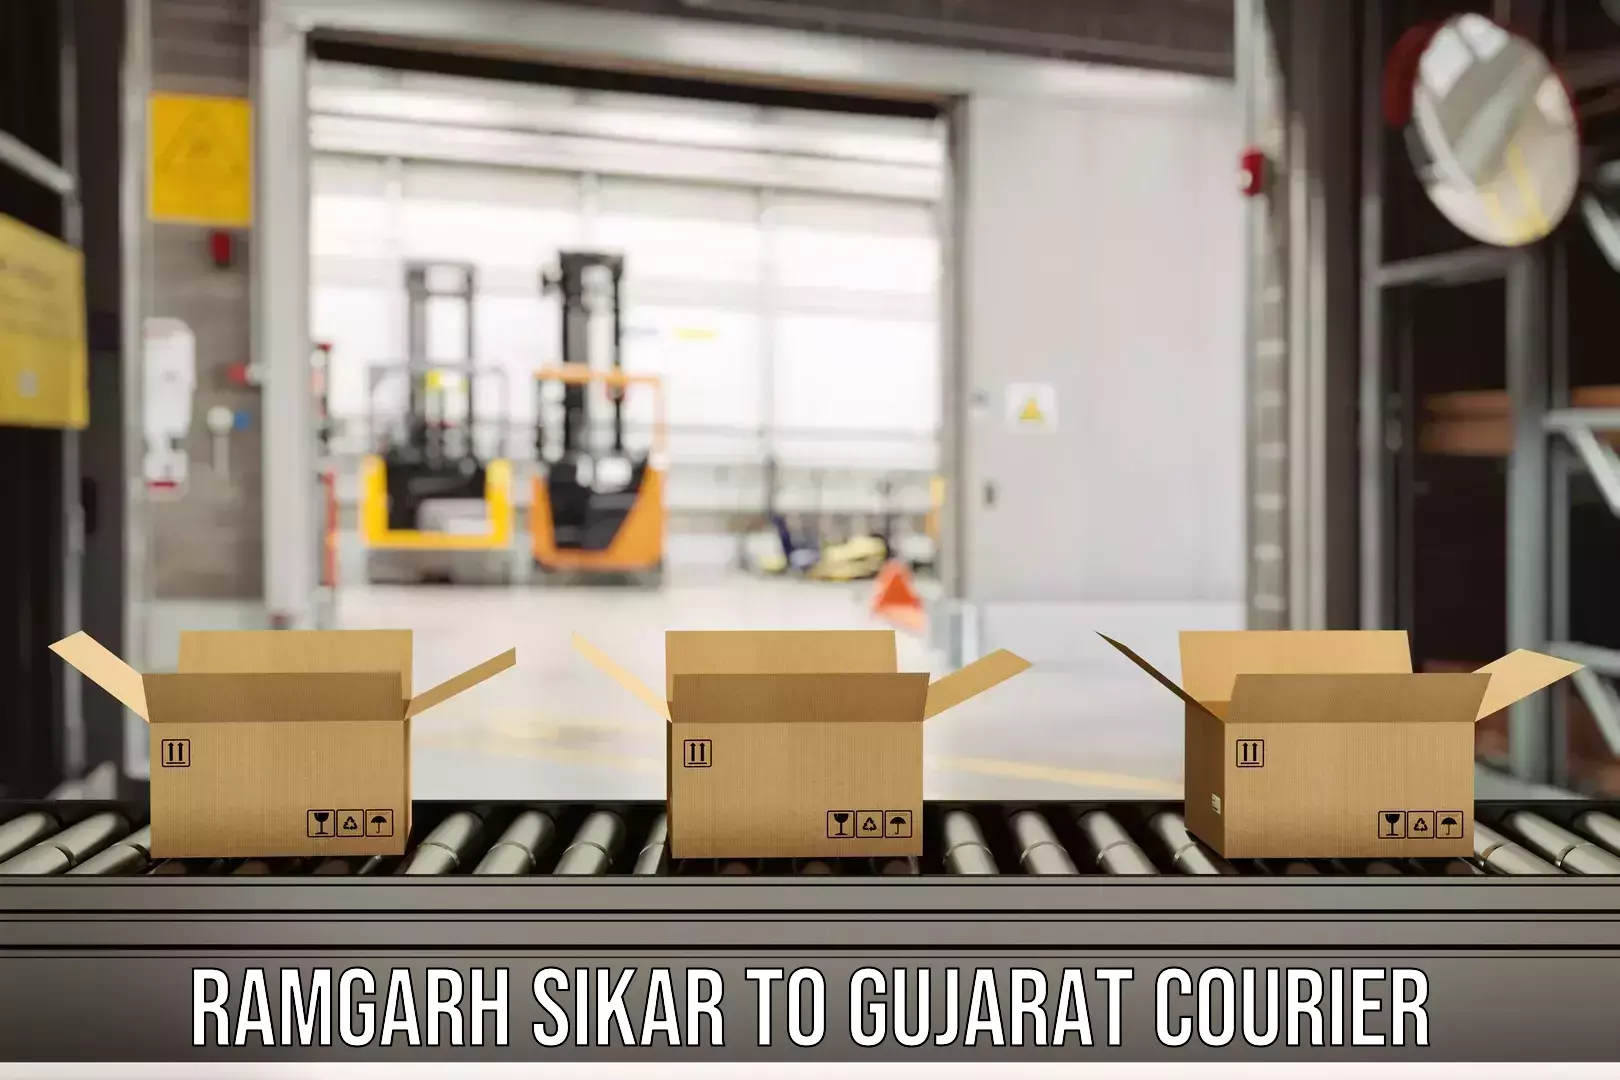 Affordable parcel service Ramgarh Sikar to Dabhoi